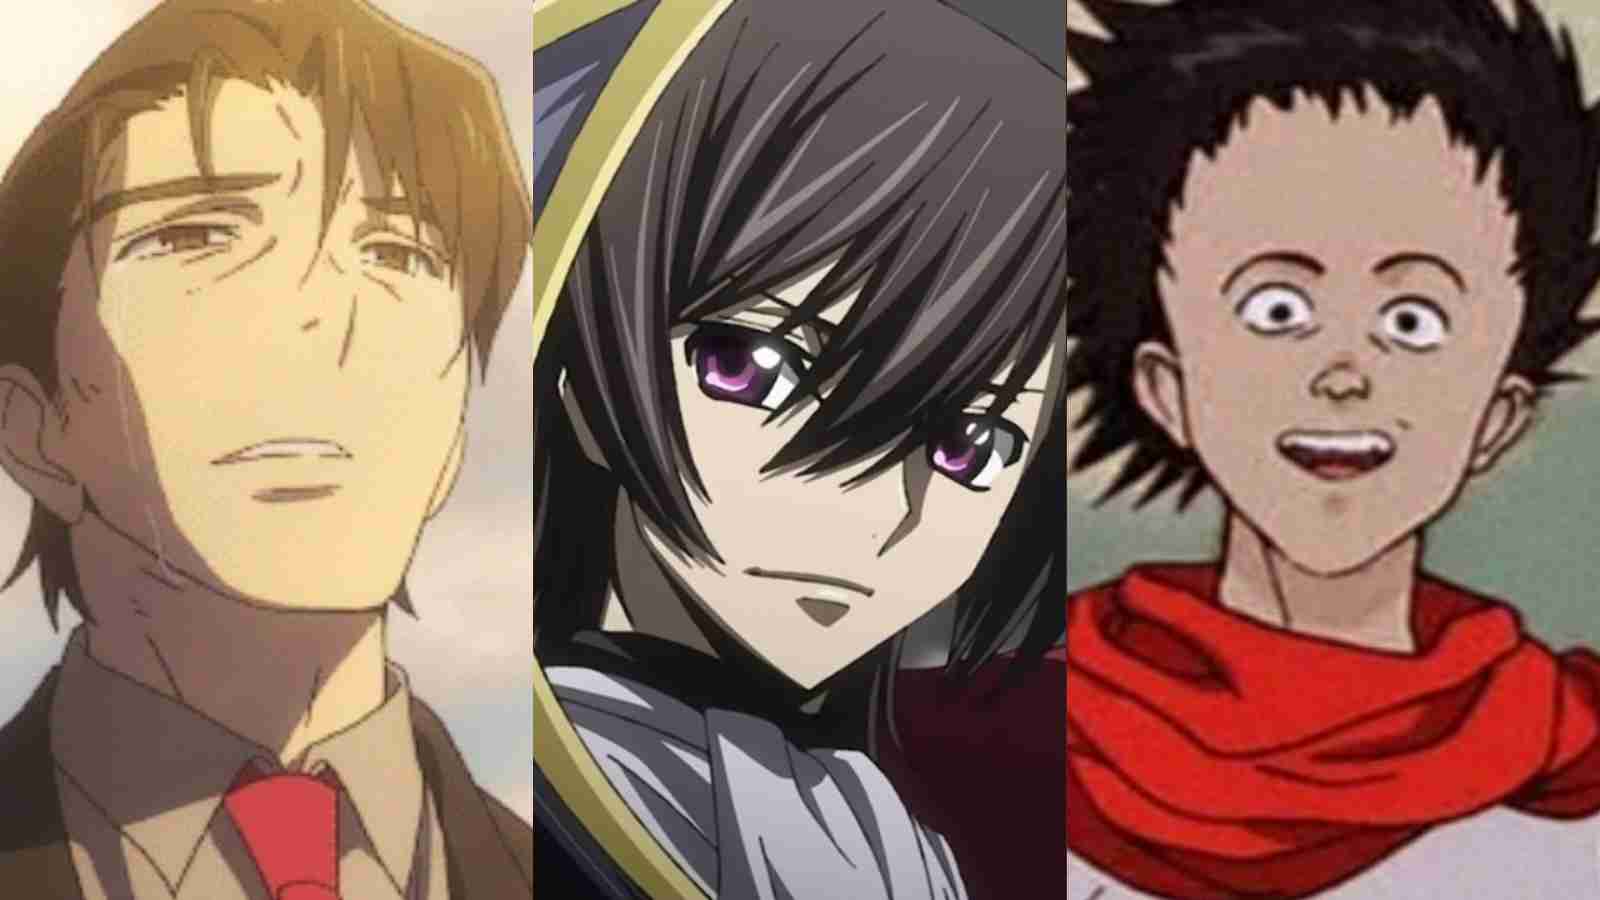 Eren and Lelouch: Heroes or Villains?